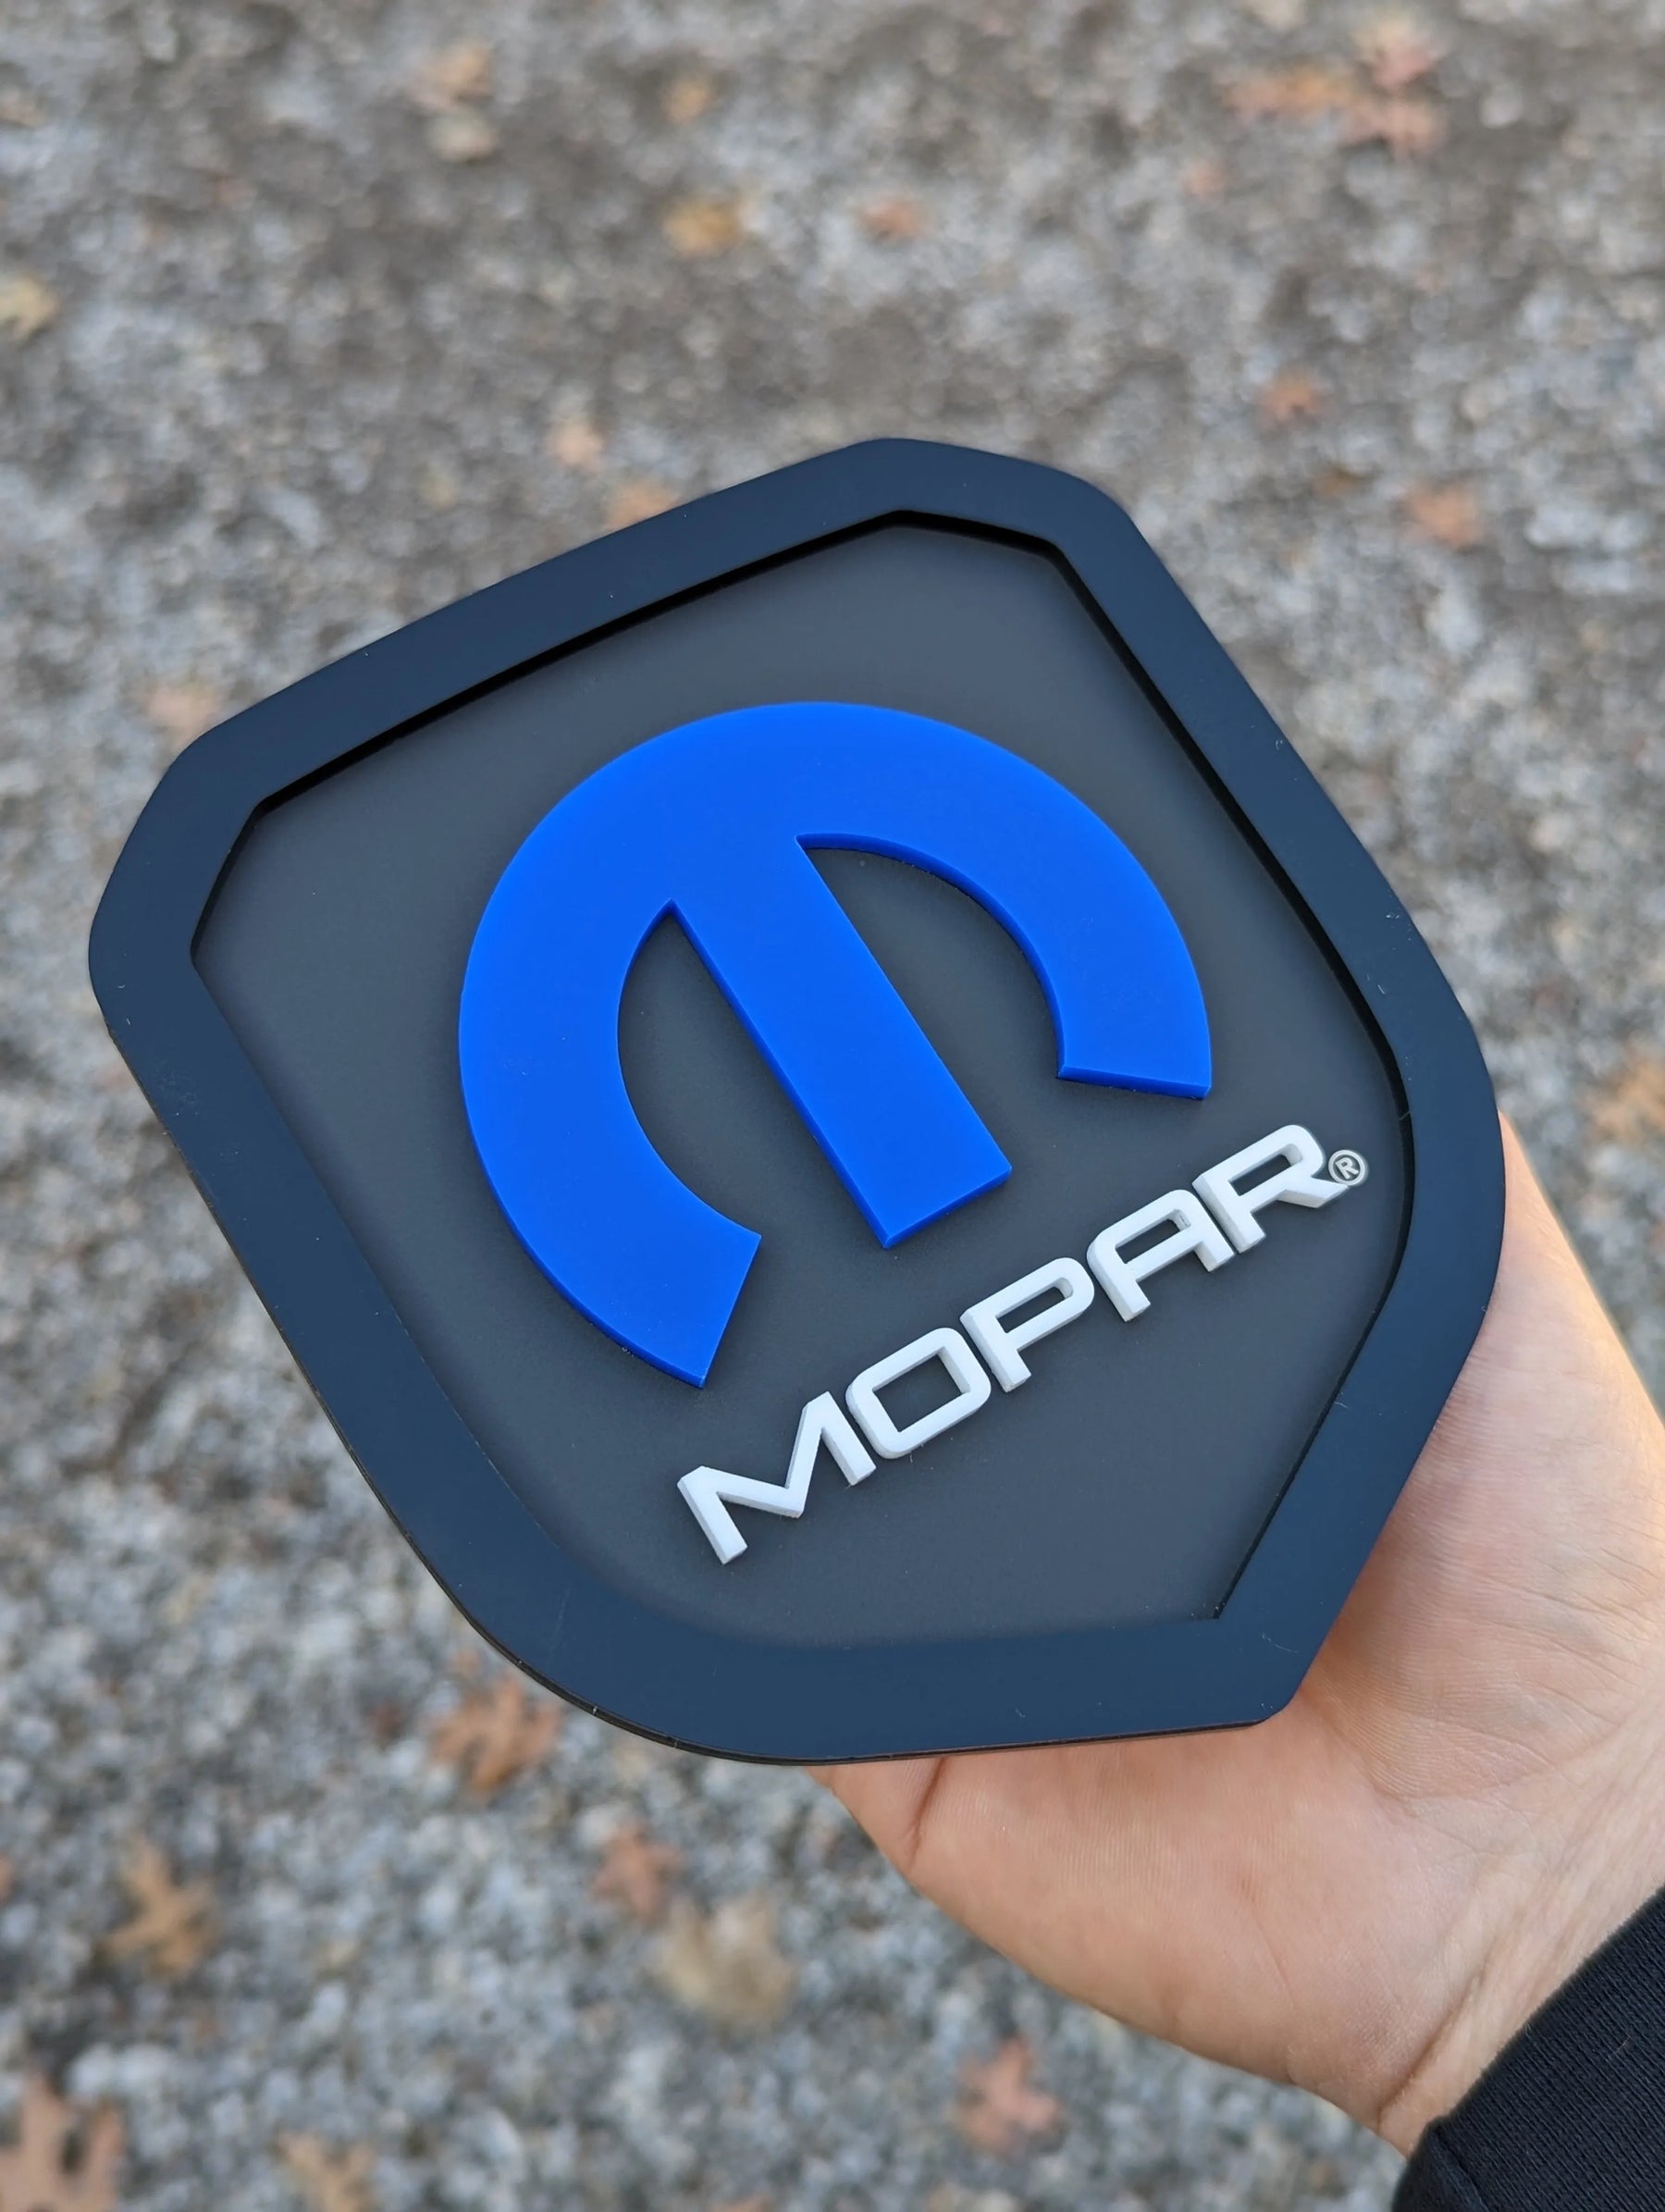 Mopar® Grille Badge - Fits 2013-2018 RAM® and 2019+ Classic Grille - 1500, 2500, 3500 - Officially Licensed Product